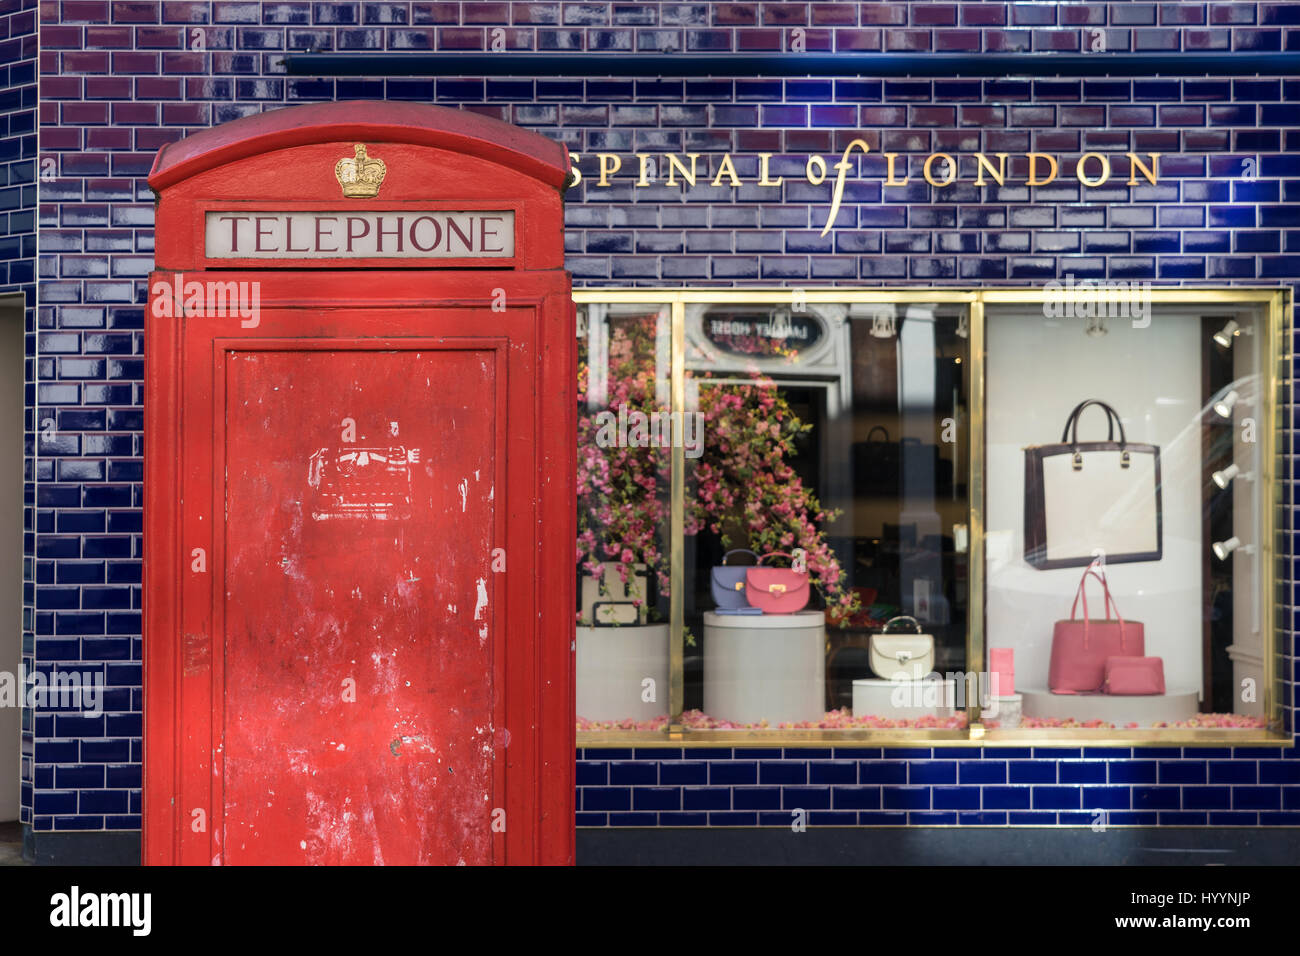 London - March 30: Iconic phone booth in front of shop with blue tile wall on March 30, 2017. Stock Photo